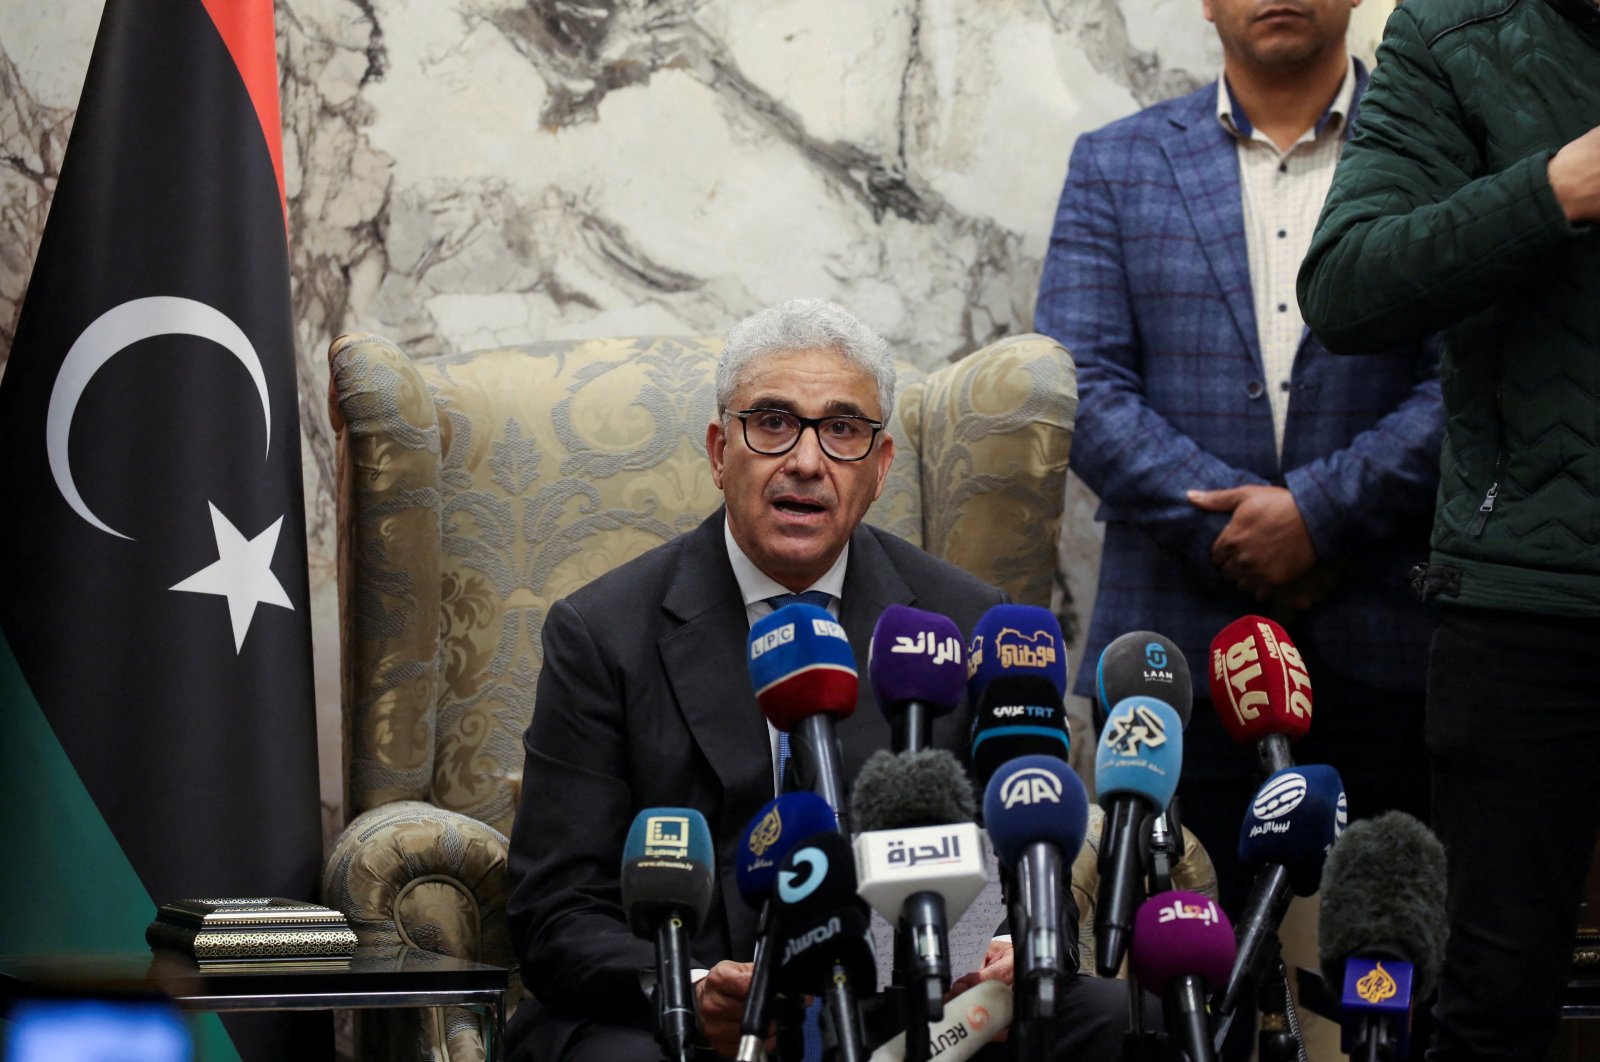 Fathi Bashagha, designated as prime minister by parliament, delivers a speech at Mitiga International Airport, in Tripoli, Libya, Feb. 10, 2022. (Reuters Photo)